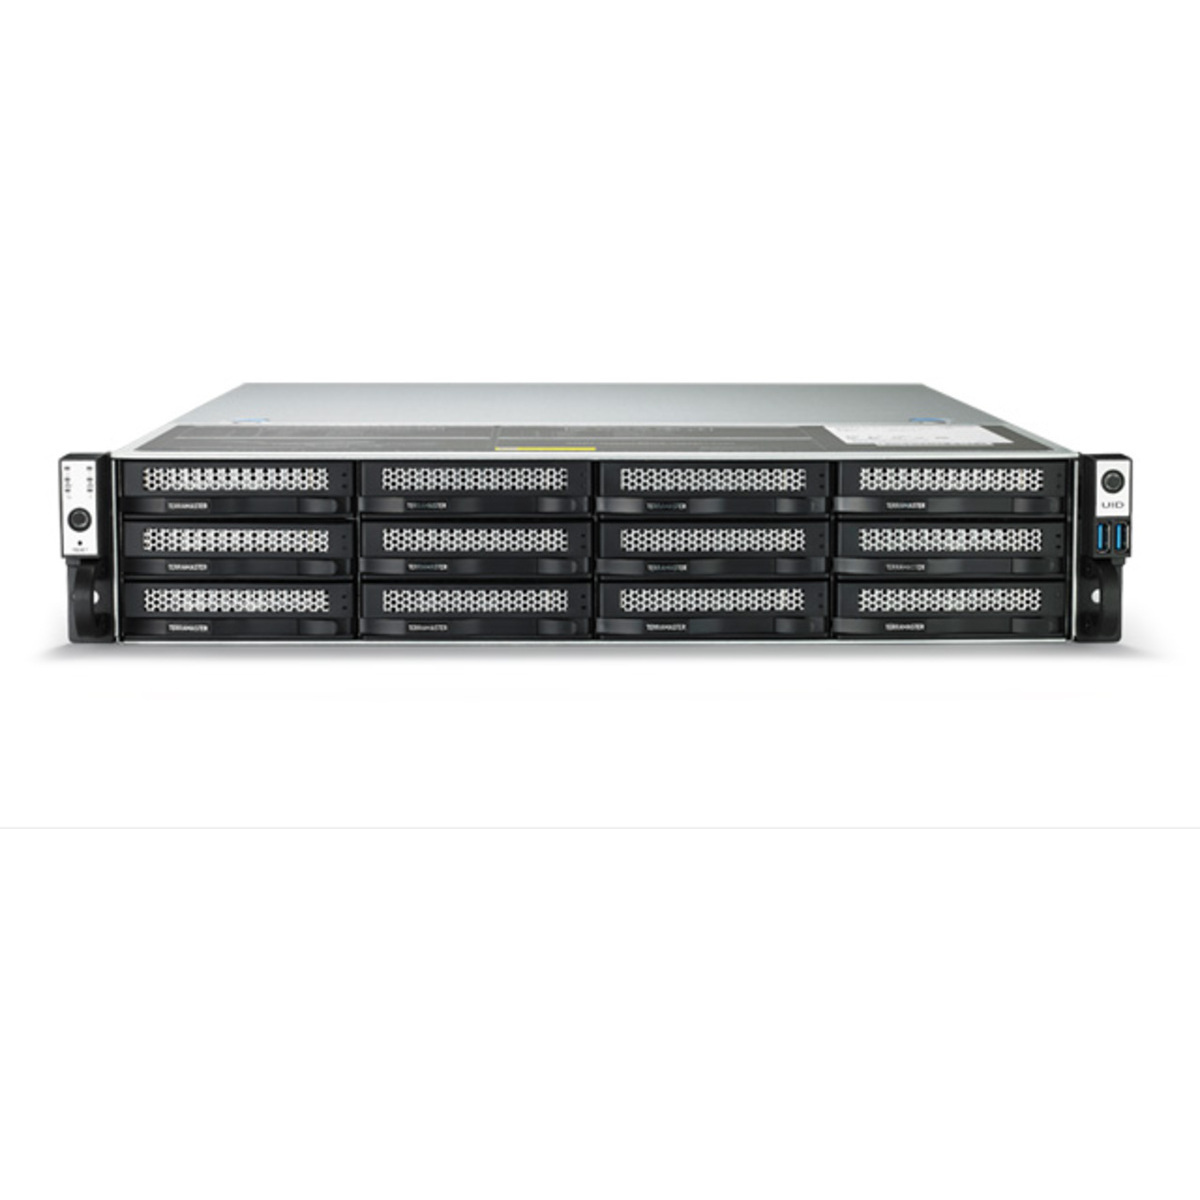 TerraMaster U12-722-2224 64tb 12-Bay RackMount Large Business / Enterprise NAS - Network Attached Storage Device 8x8tb Western Digital Red Plus WD80EFPX 3.5 7200rpm SATA 6Gb/s HDD NAS Class Drives Installed - Burn-In Tested U12-722-2224